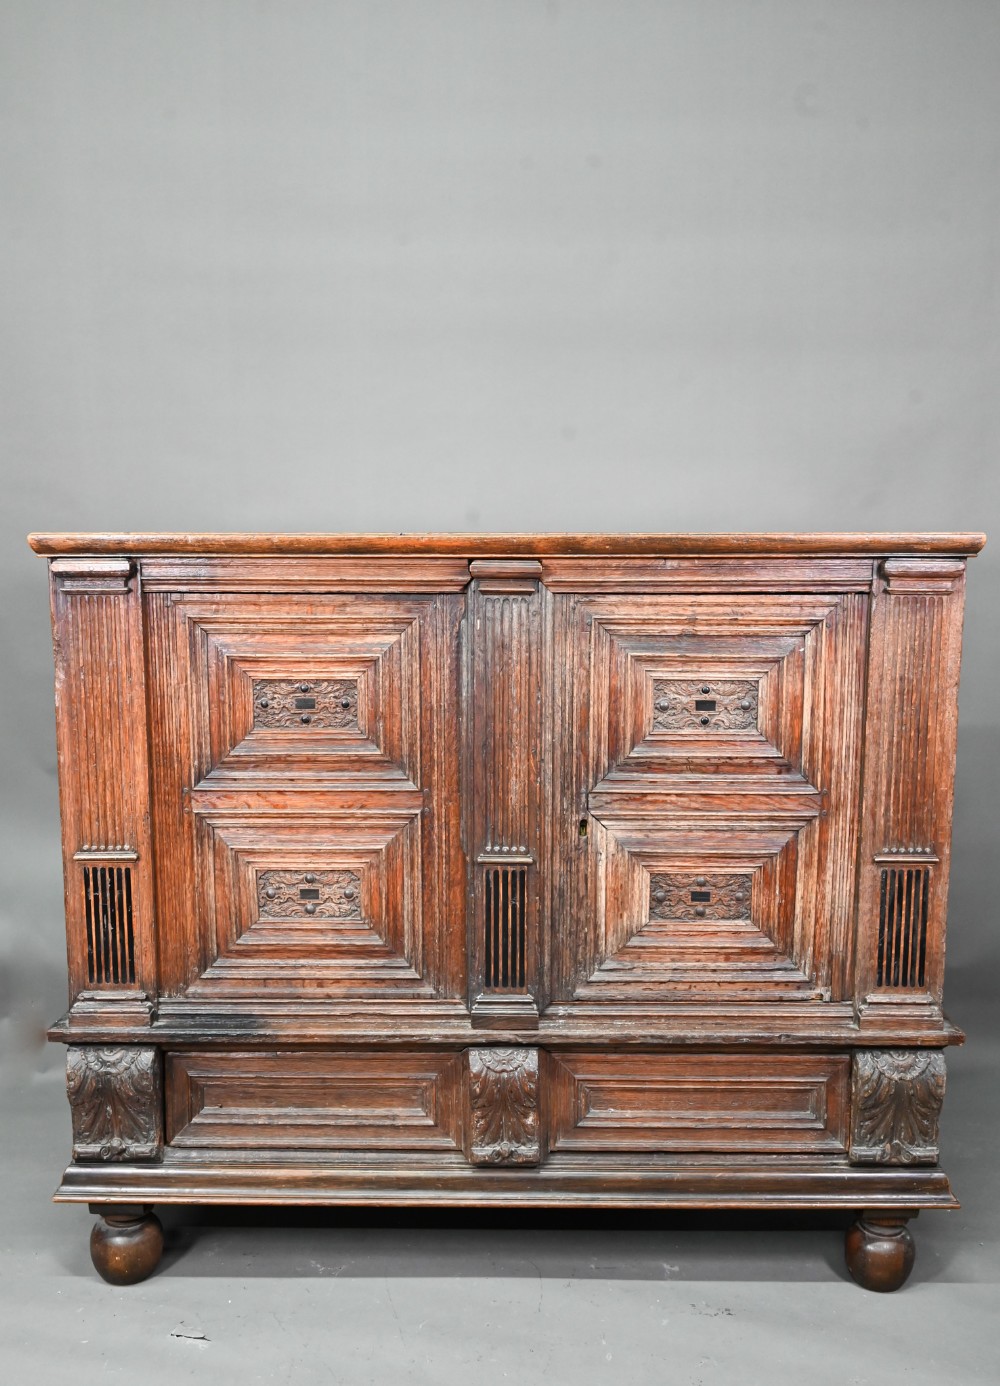 A 17th century jointed oak cupboard, with two moulded panelled doors over a full width drawer,